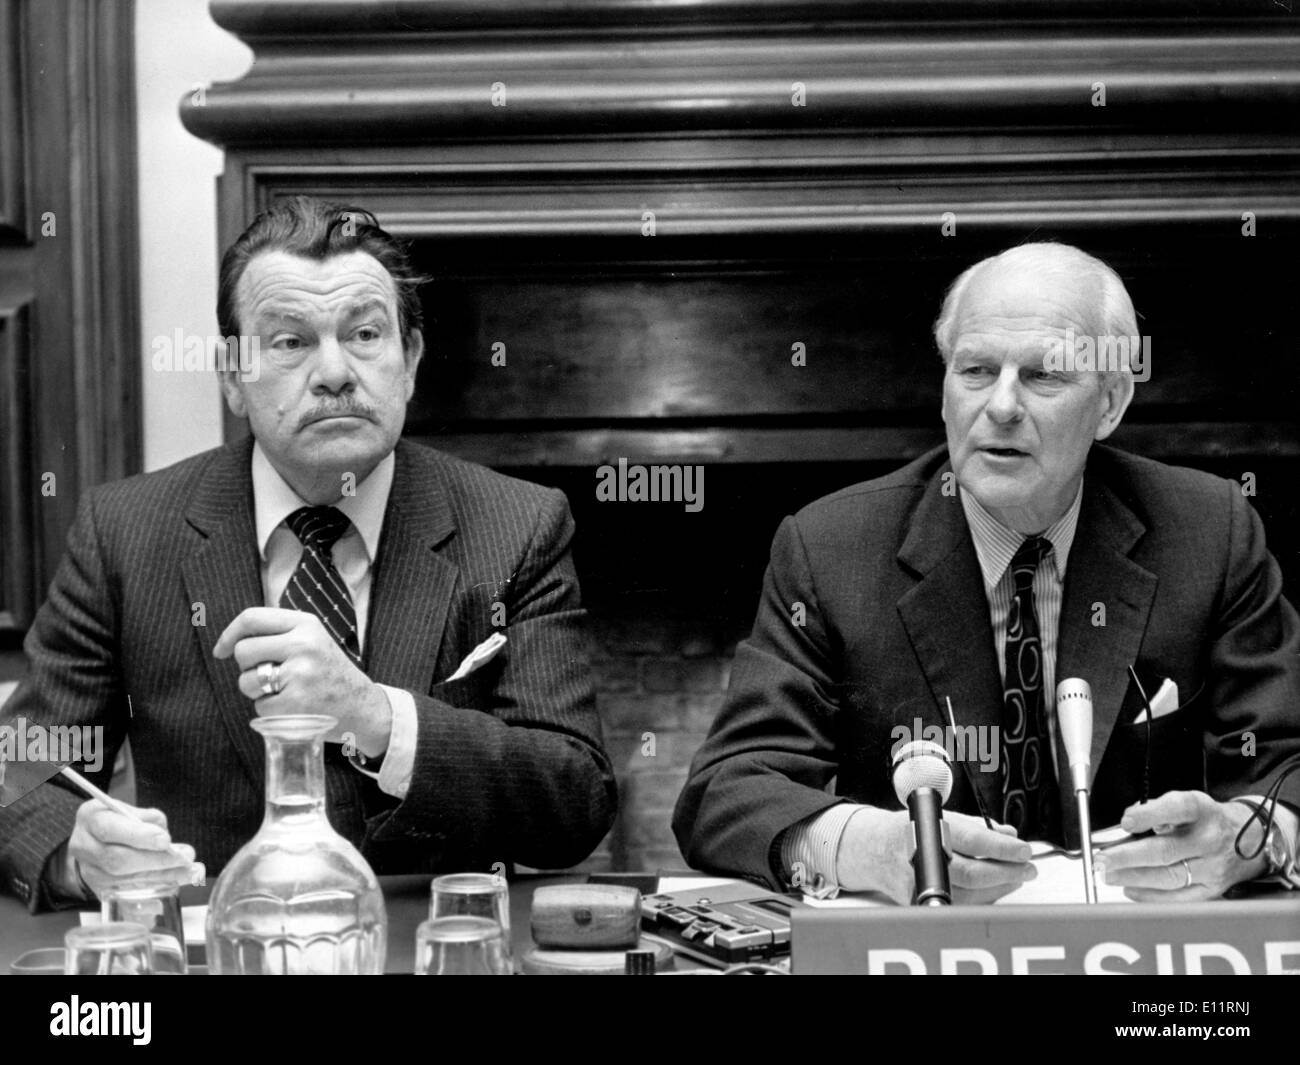 Jan 05, 1980; Paris, France; During a press conference in Paris, the President of the Parlamentary Assembly of the Eurpean Council, announced that the situation in Afghanistan at the winter session of the Parlamentary Assembly of the European Council in Strasbourg. The picture shows Mr. HANS J. DE KOSTER (R) and French Representant JACQUES BAUMEL, during the press conference. Stock Photo